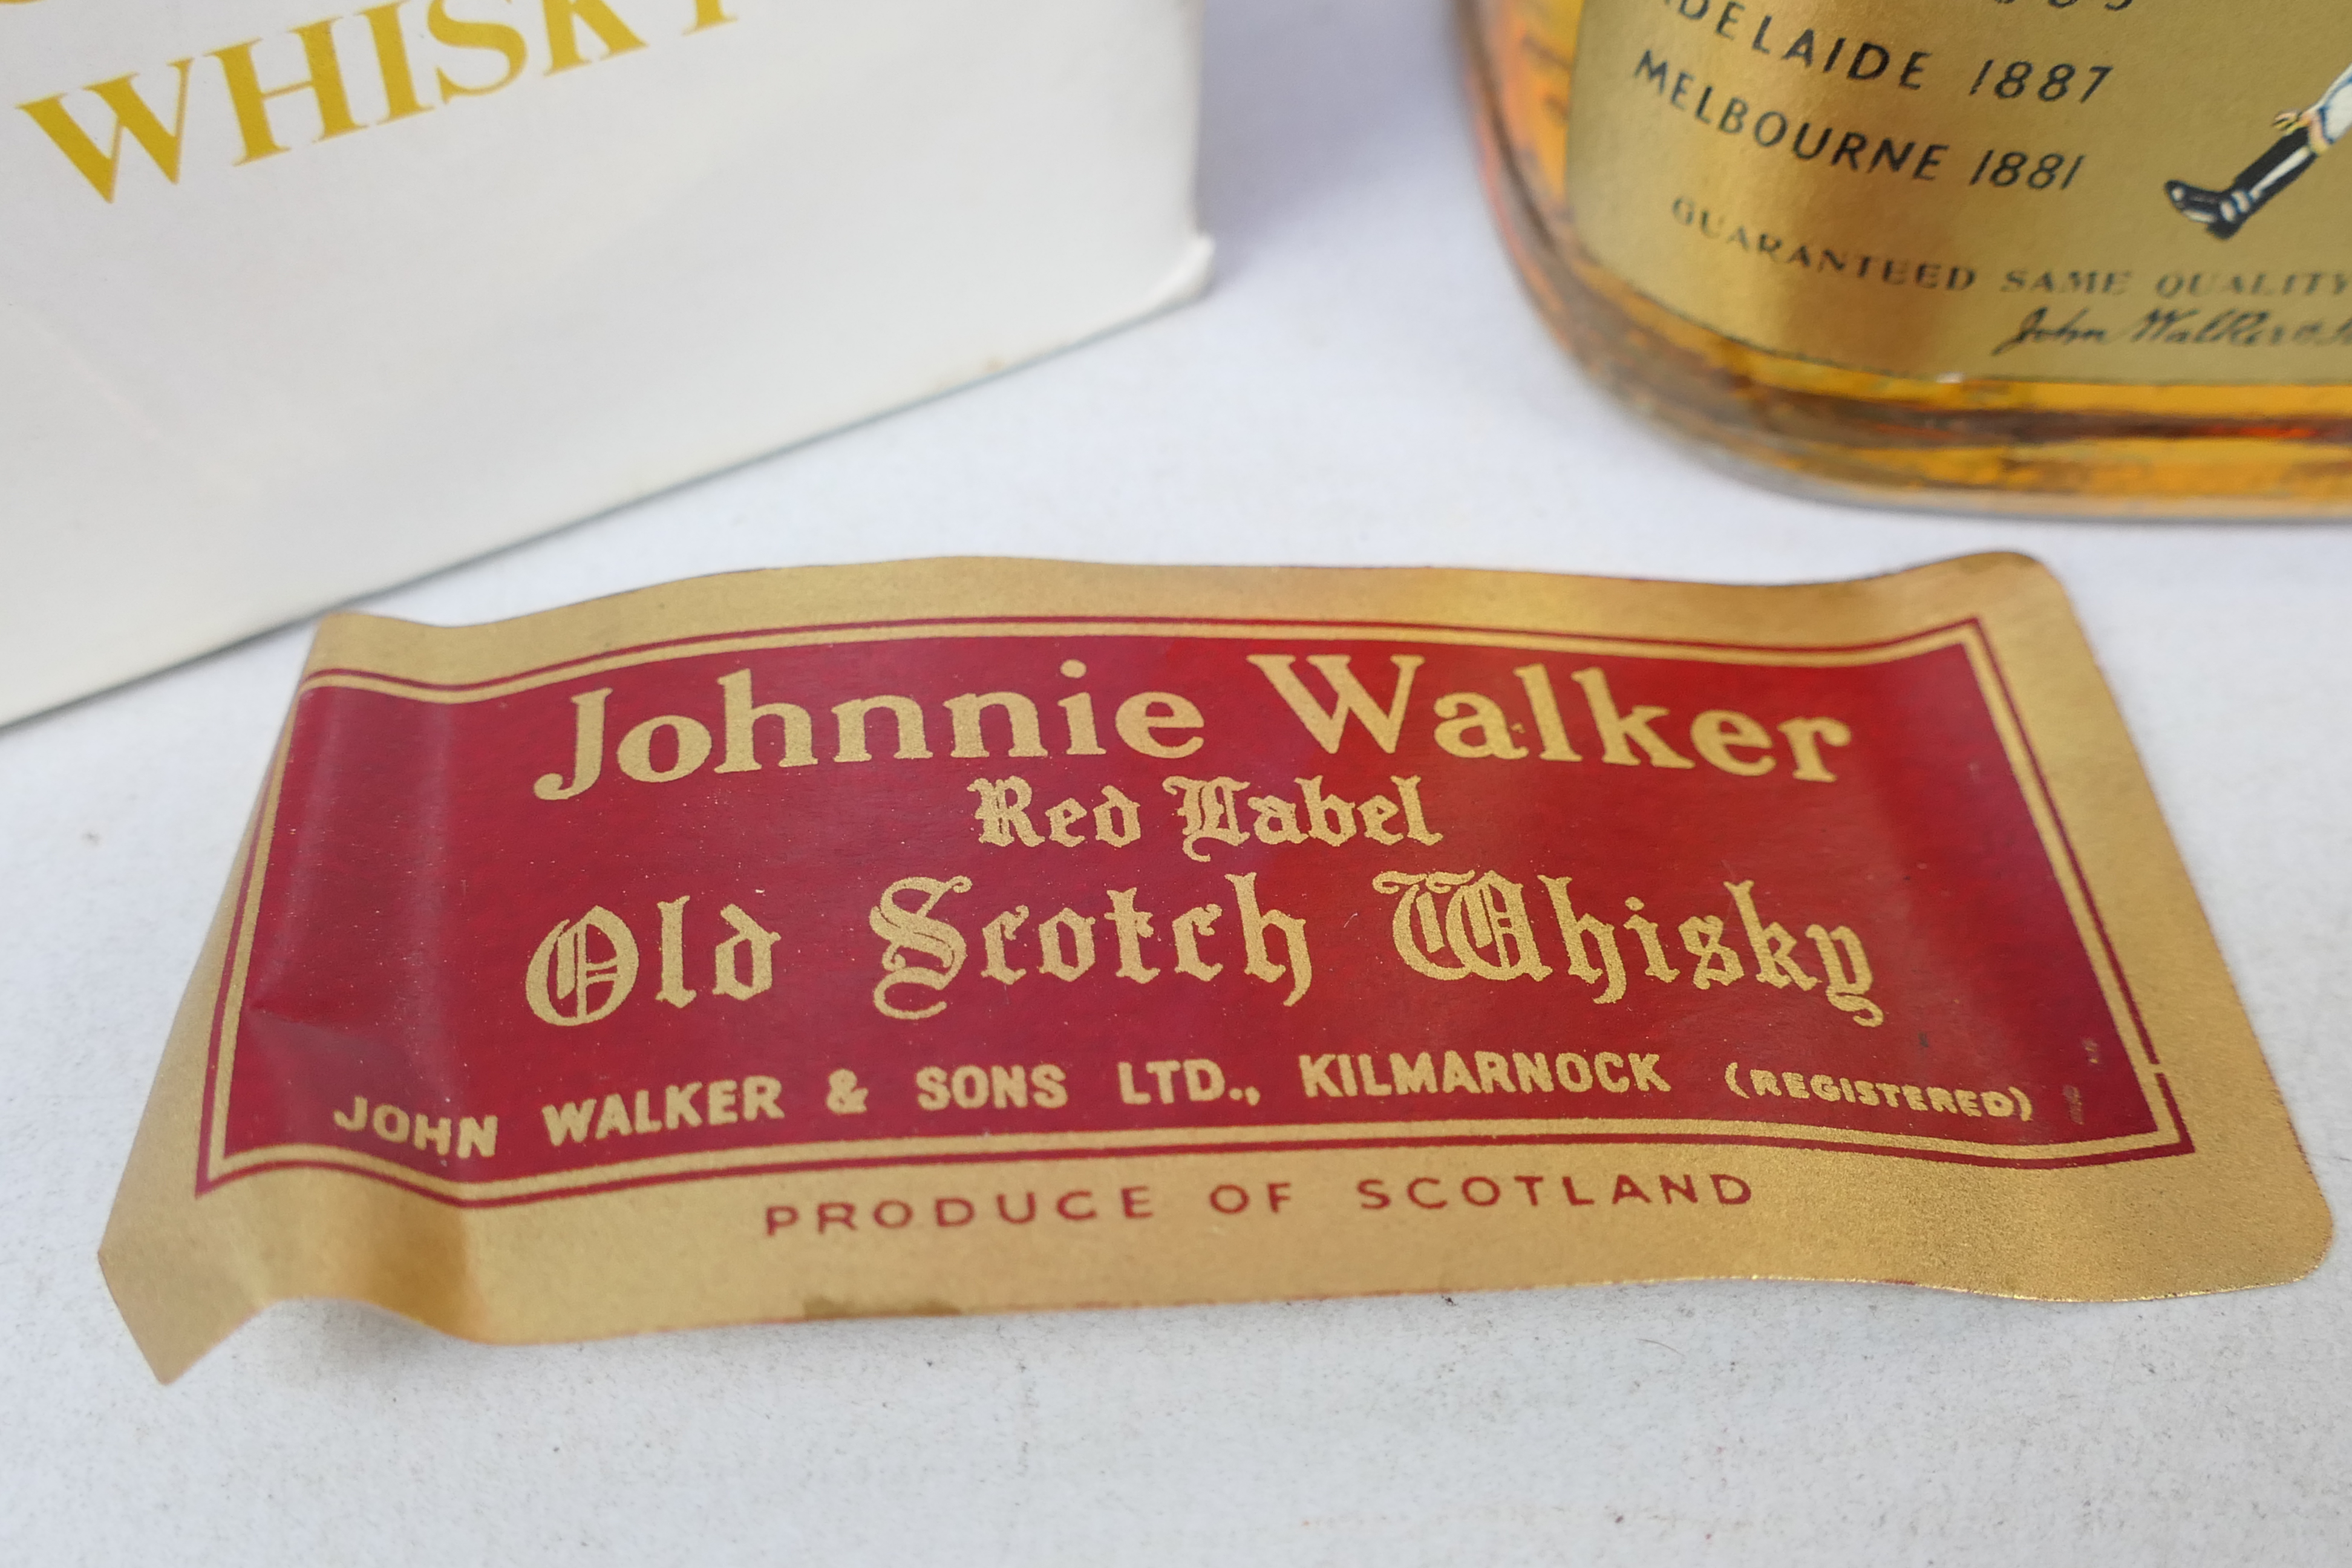 Two bottles of Johnnie Walker Red Label comprising one 1. - Image 3 of 8